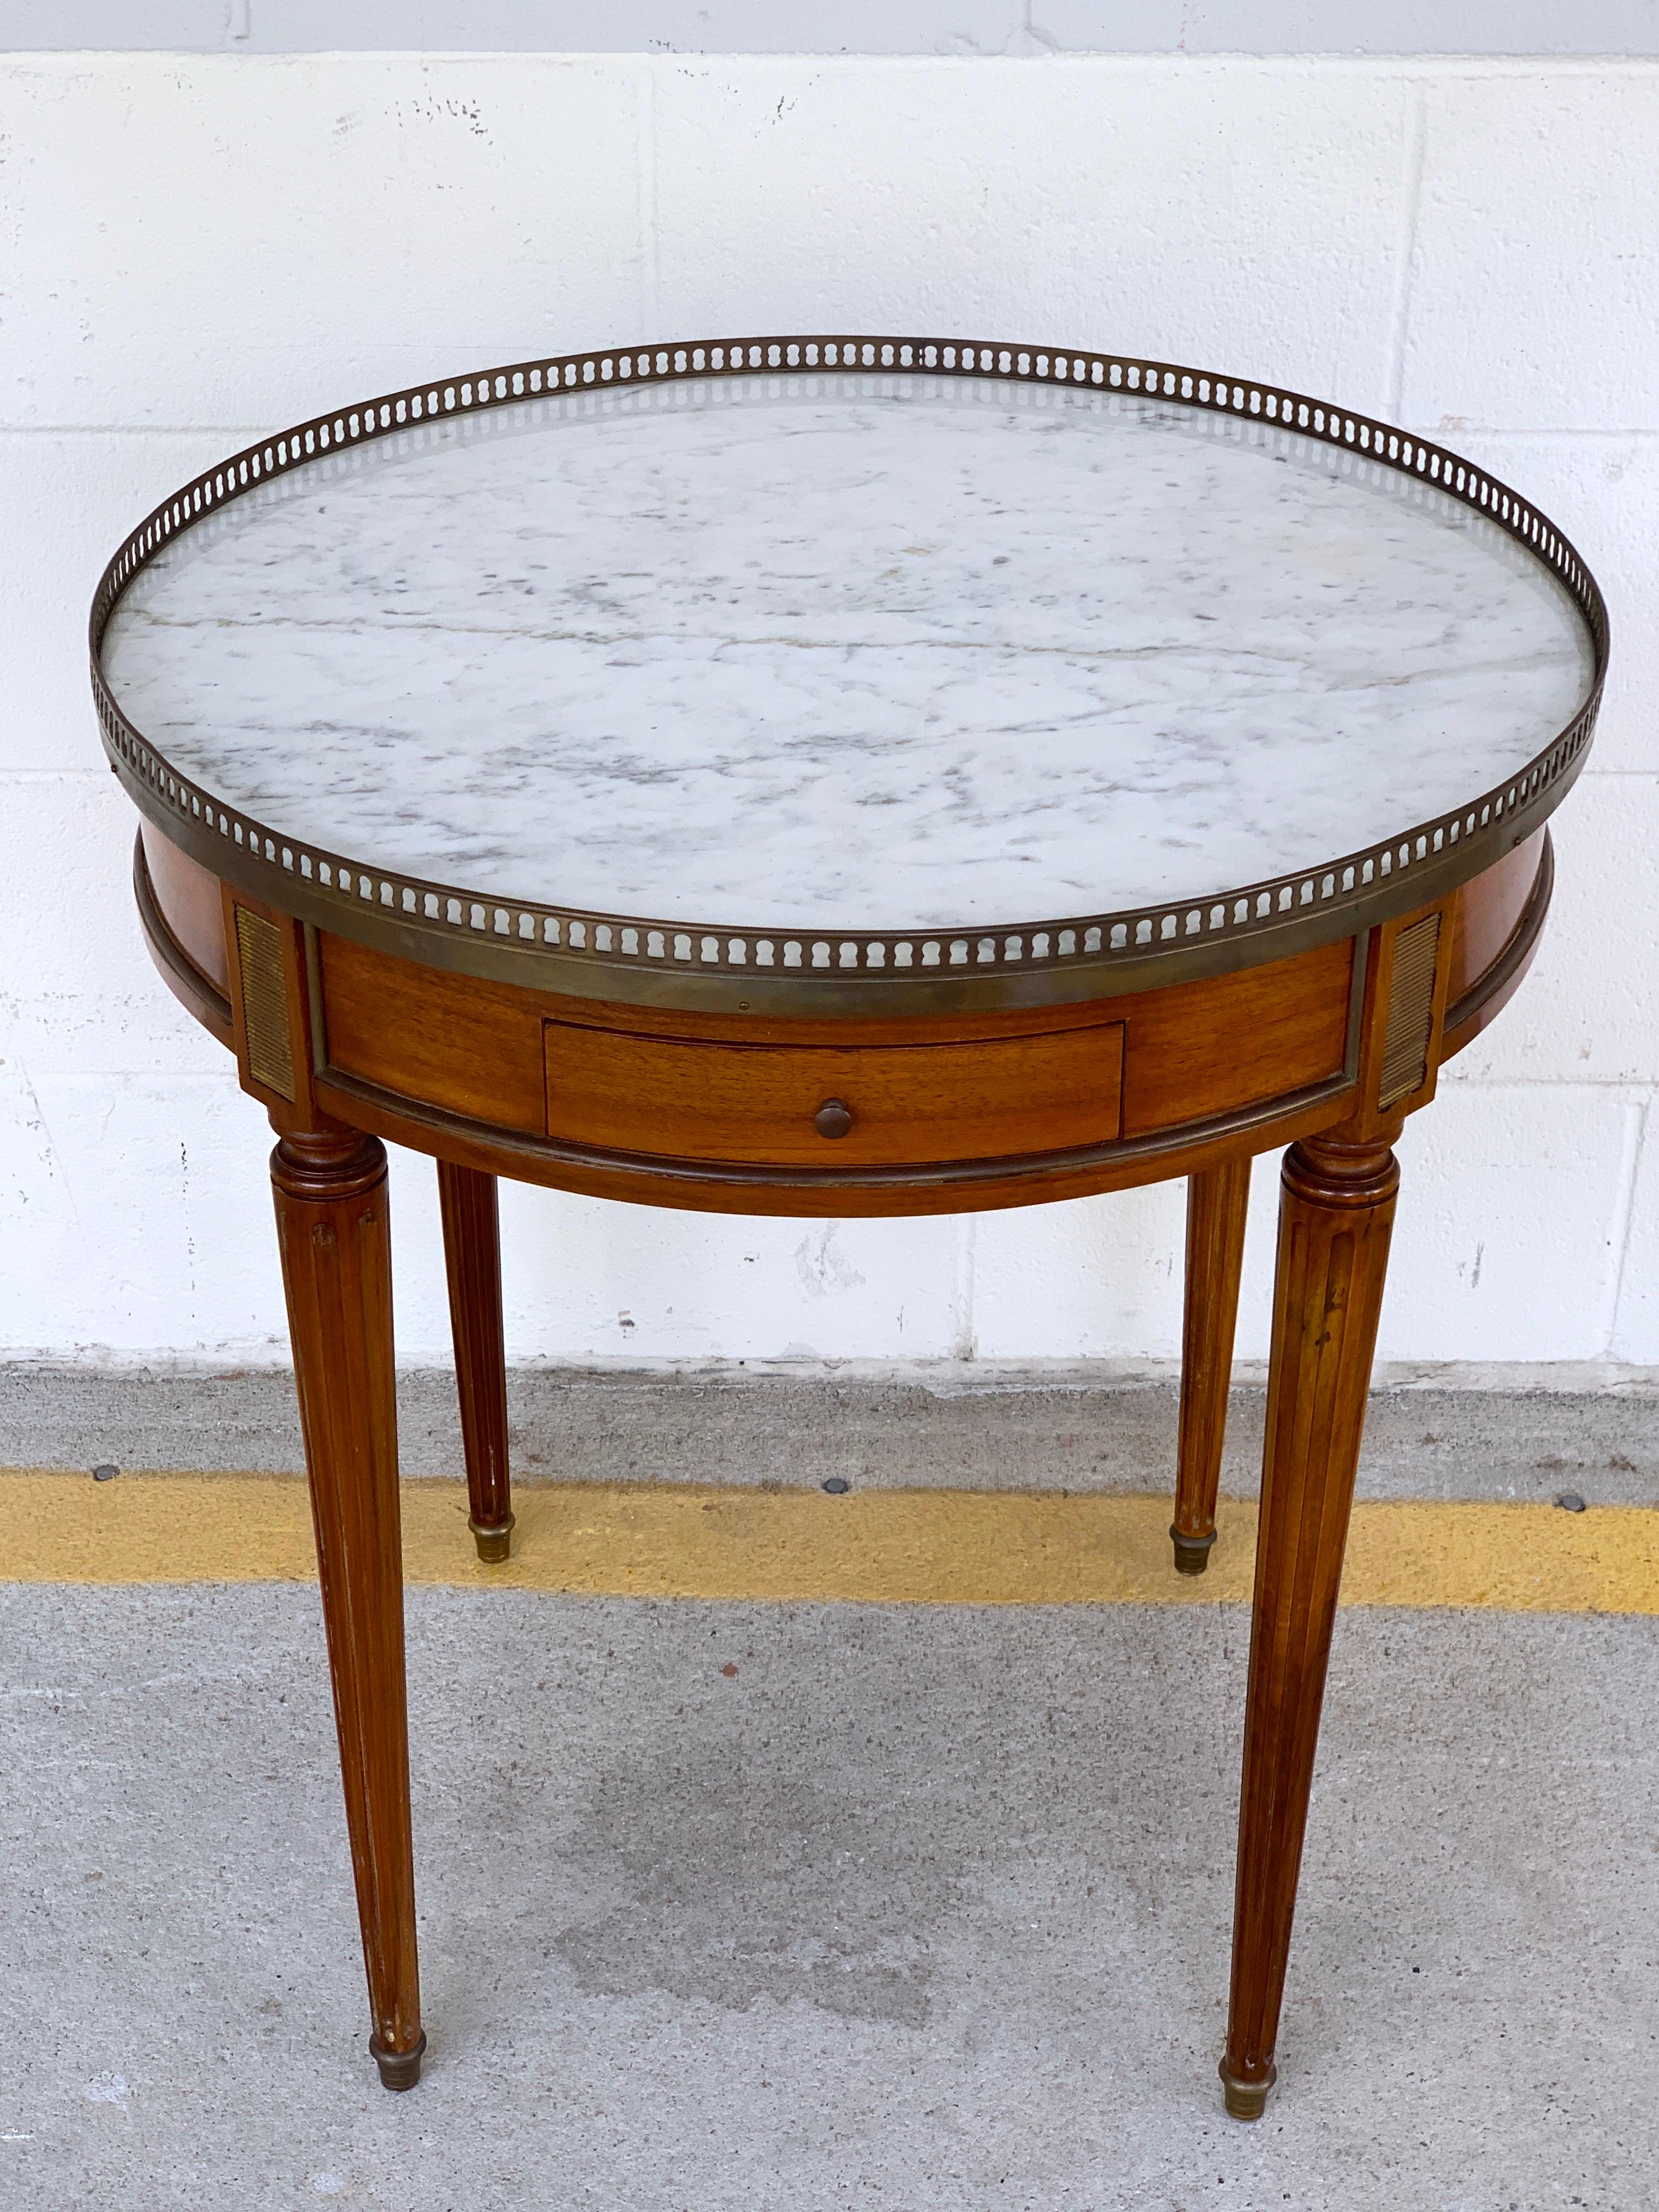 Louis XVI style Carrara marble-top Bouillotte table, stamped made in France
With pierced brass gallery, with 8.5